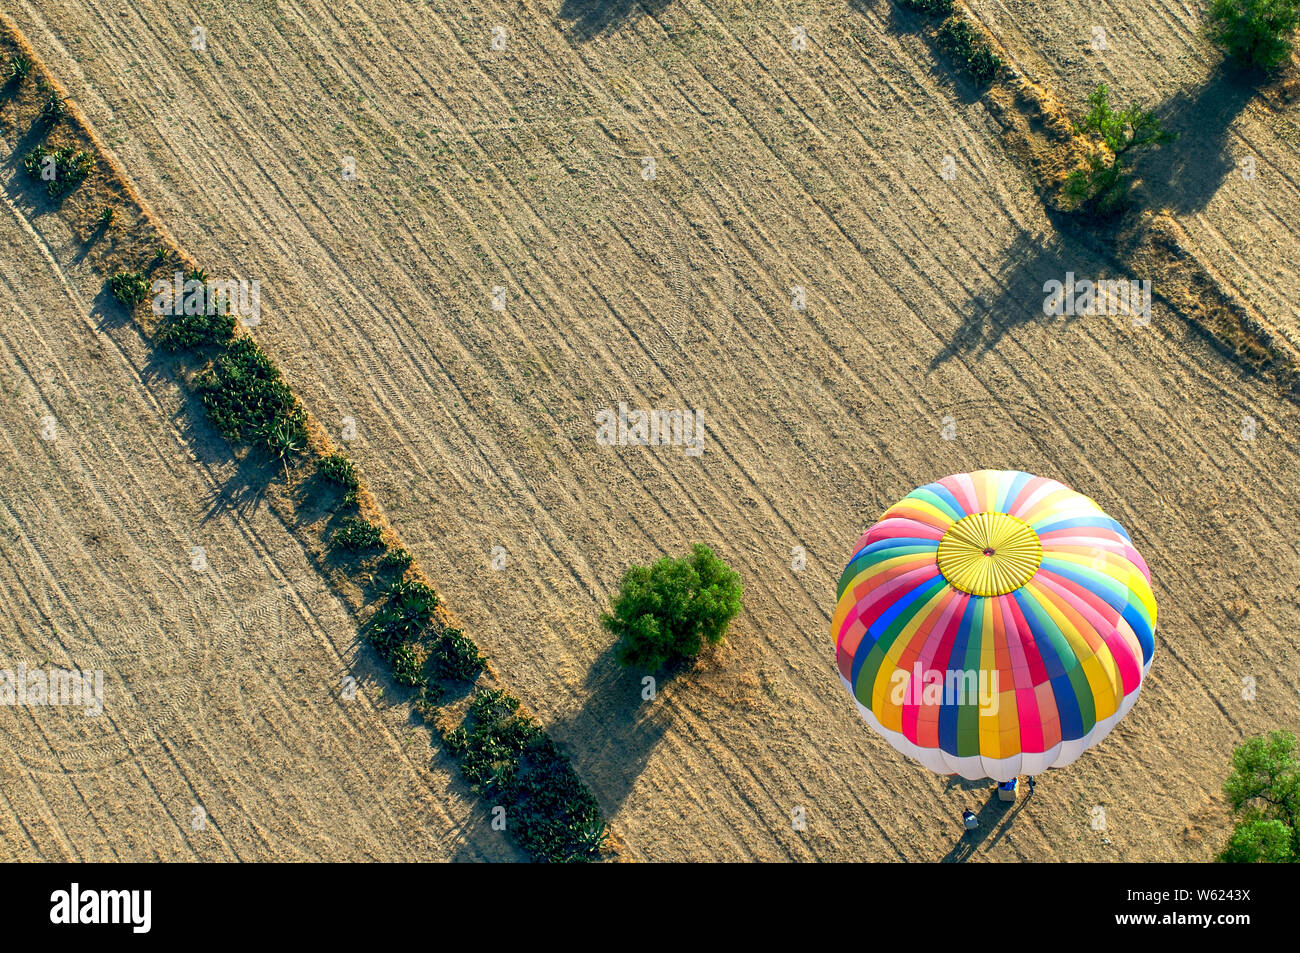 Colorful hot air balloon landing in rural farm field Banque D'Images